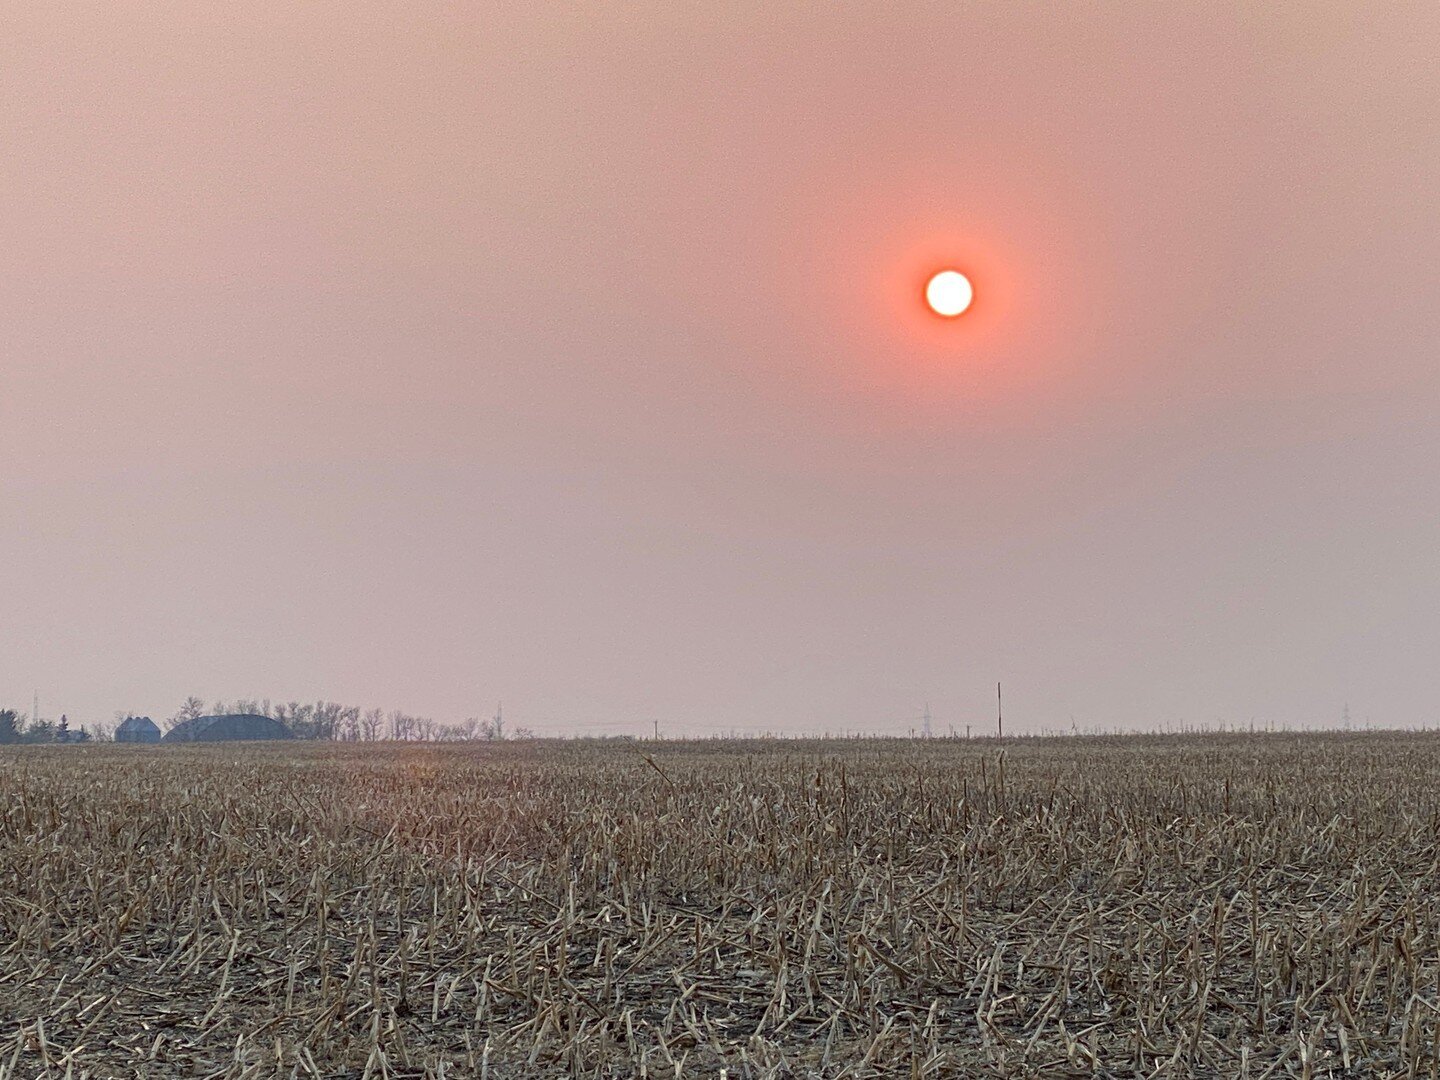 The smoky days that we've had in Manitoba throughout the last week are a sad reminder of the wildfires our neighbours in Alberta are facing. We continue to pray for all of those affected.

Thank-you to all of the men and women who are helping to keep